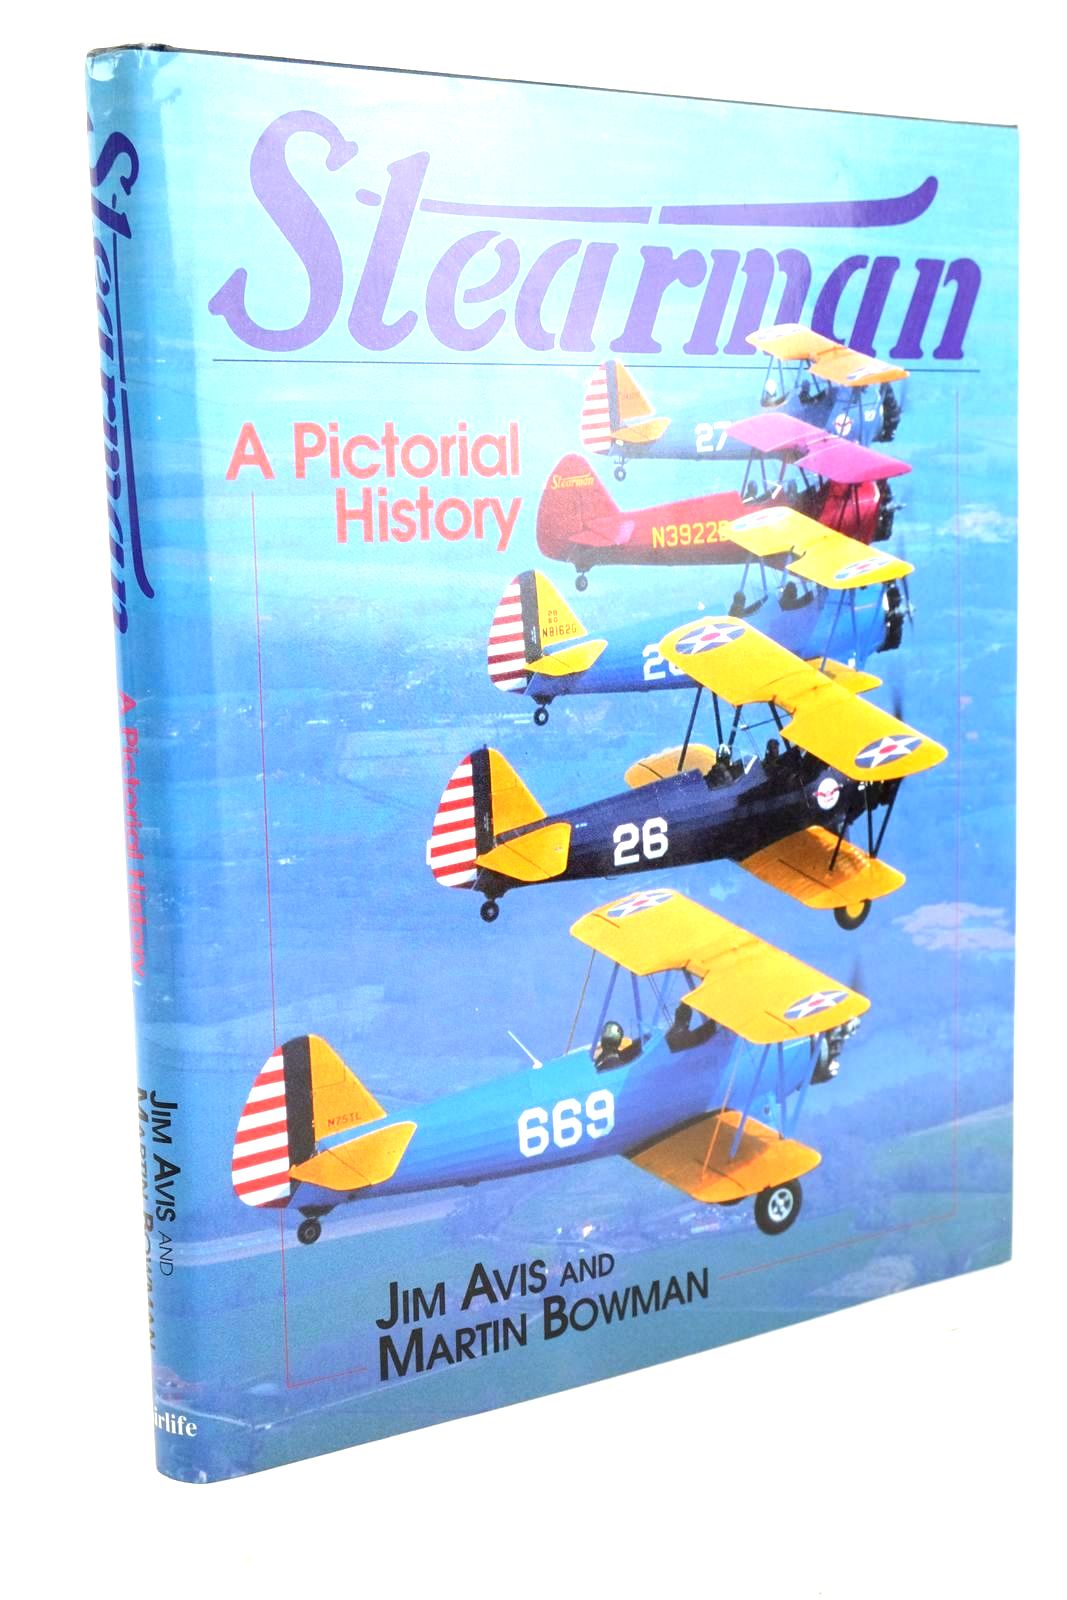 Photo of STEARMAN A PICTORIAL HISTORY- Stock Number: 1326664